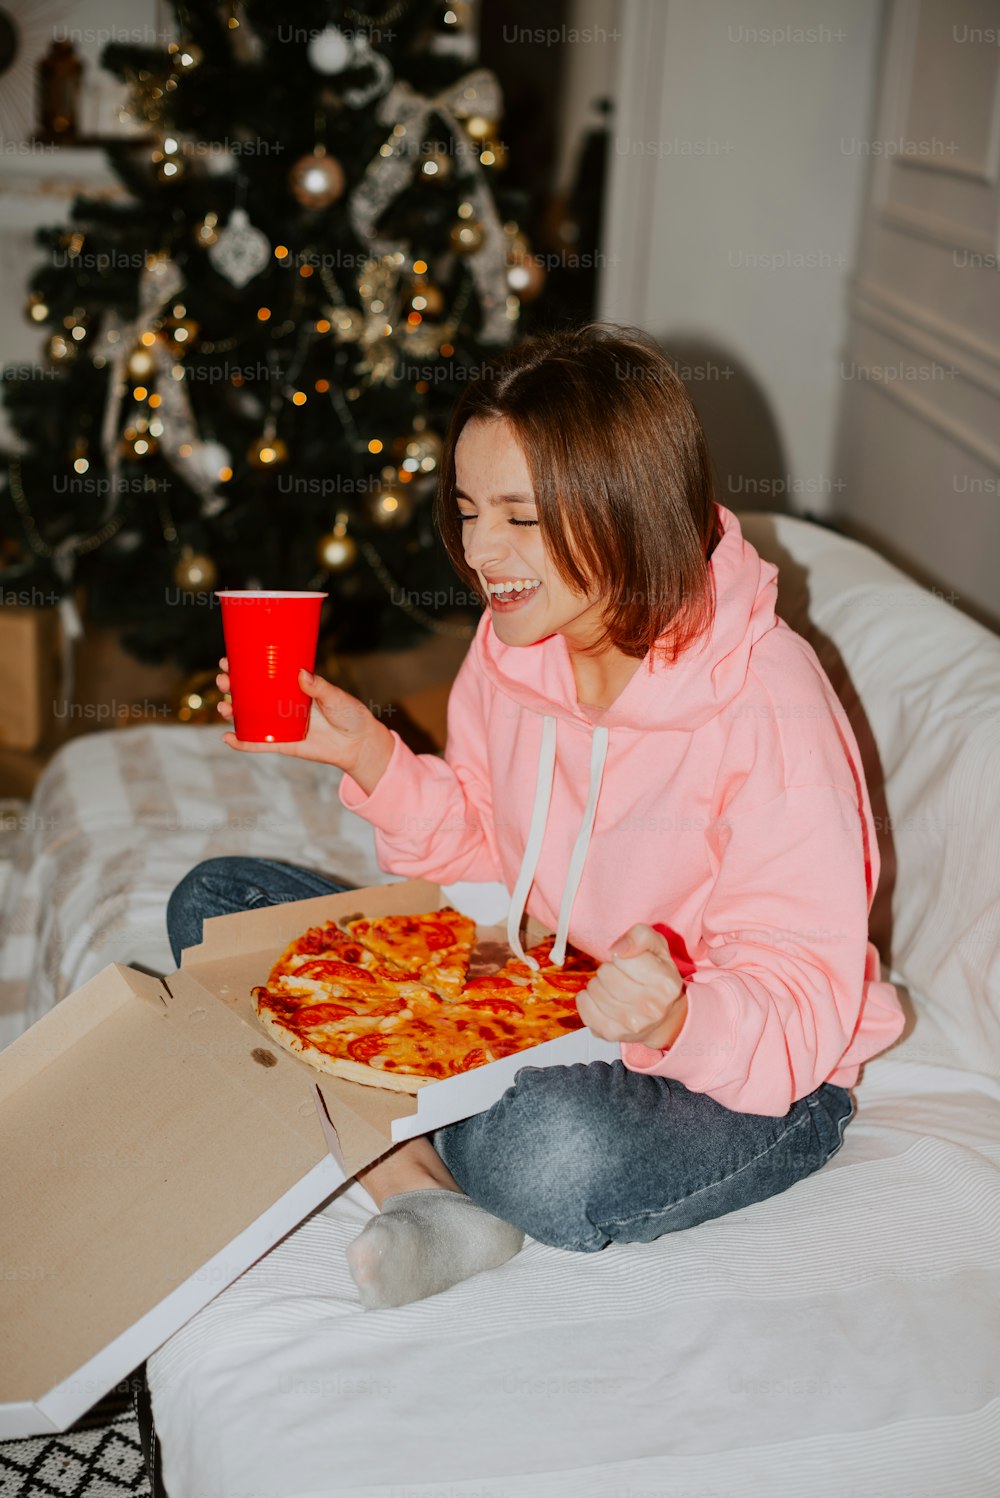 a woman sitting on a bed holding a red cup and a pizza